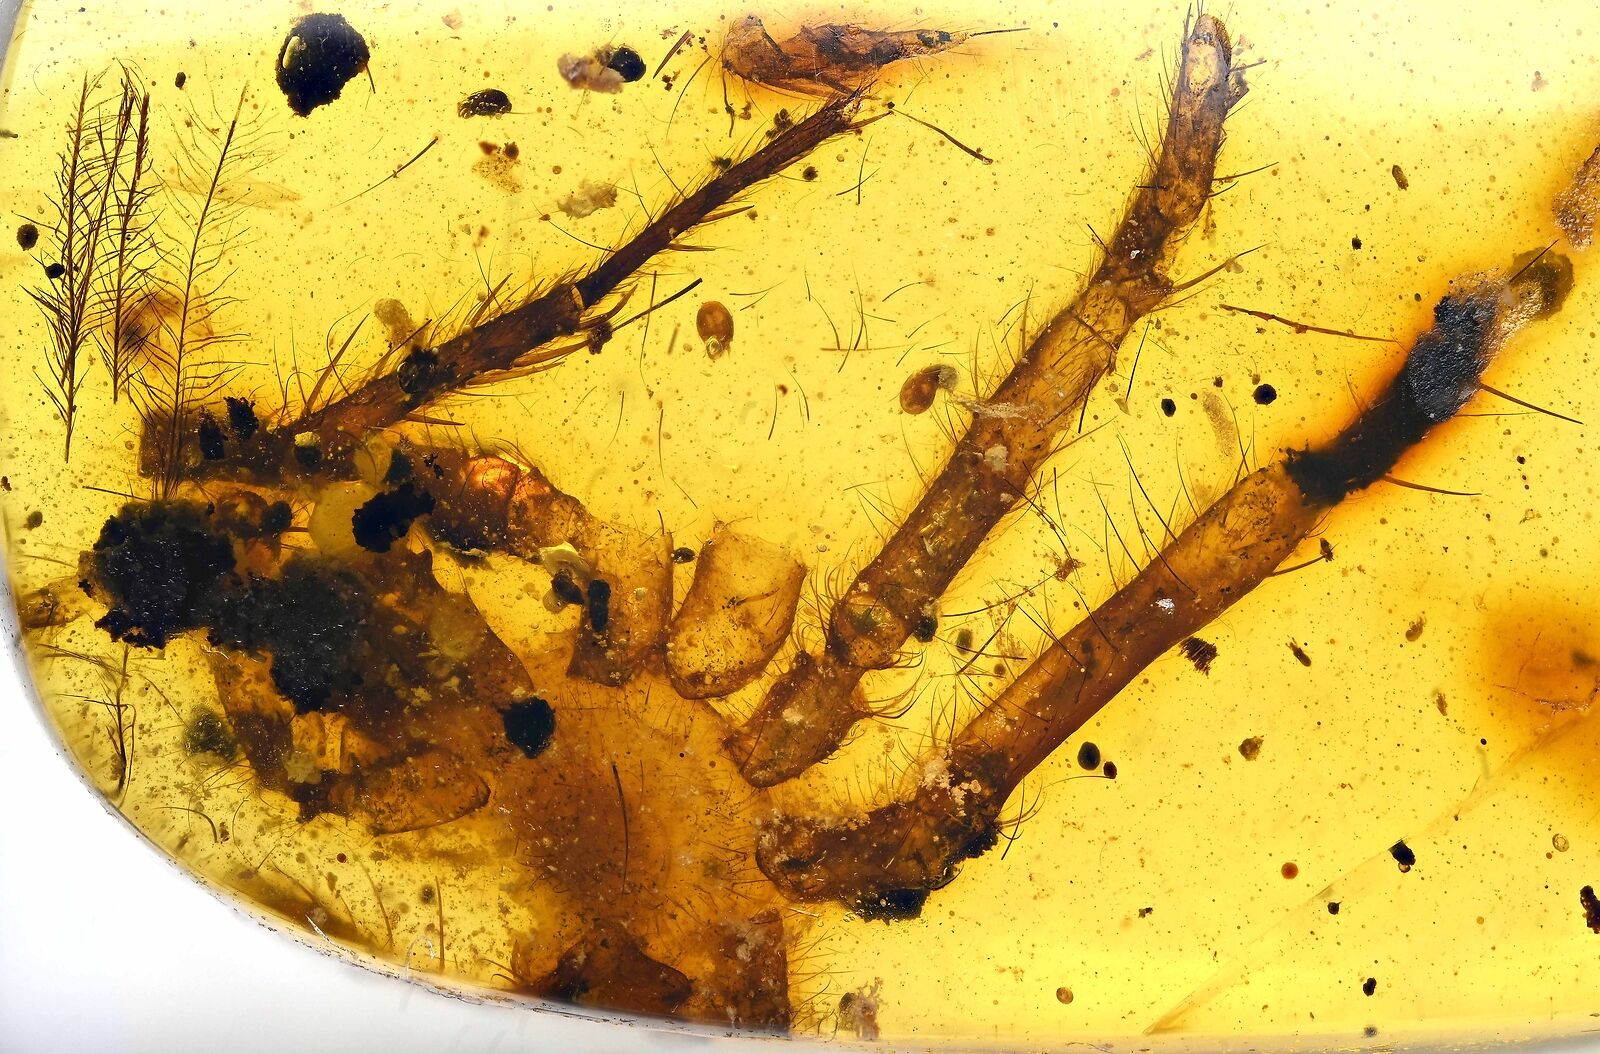 Large spider with bird feathers, Fossil Inclusion in Burmese Amber